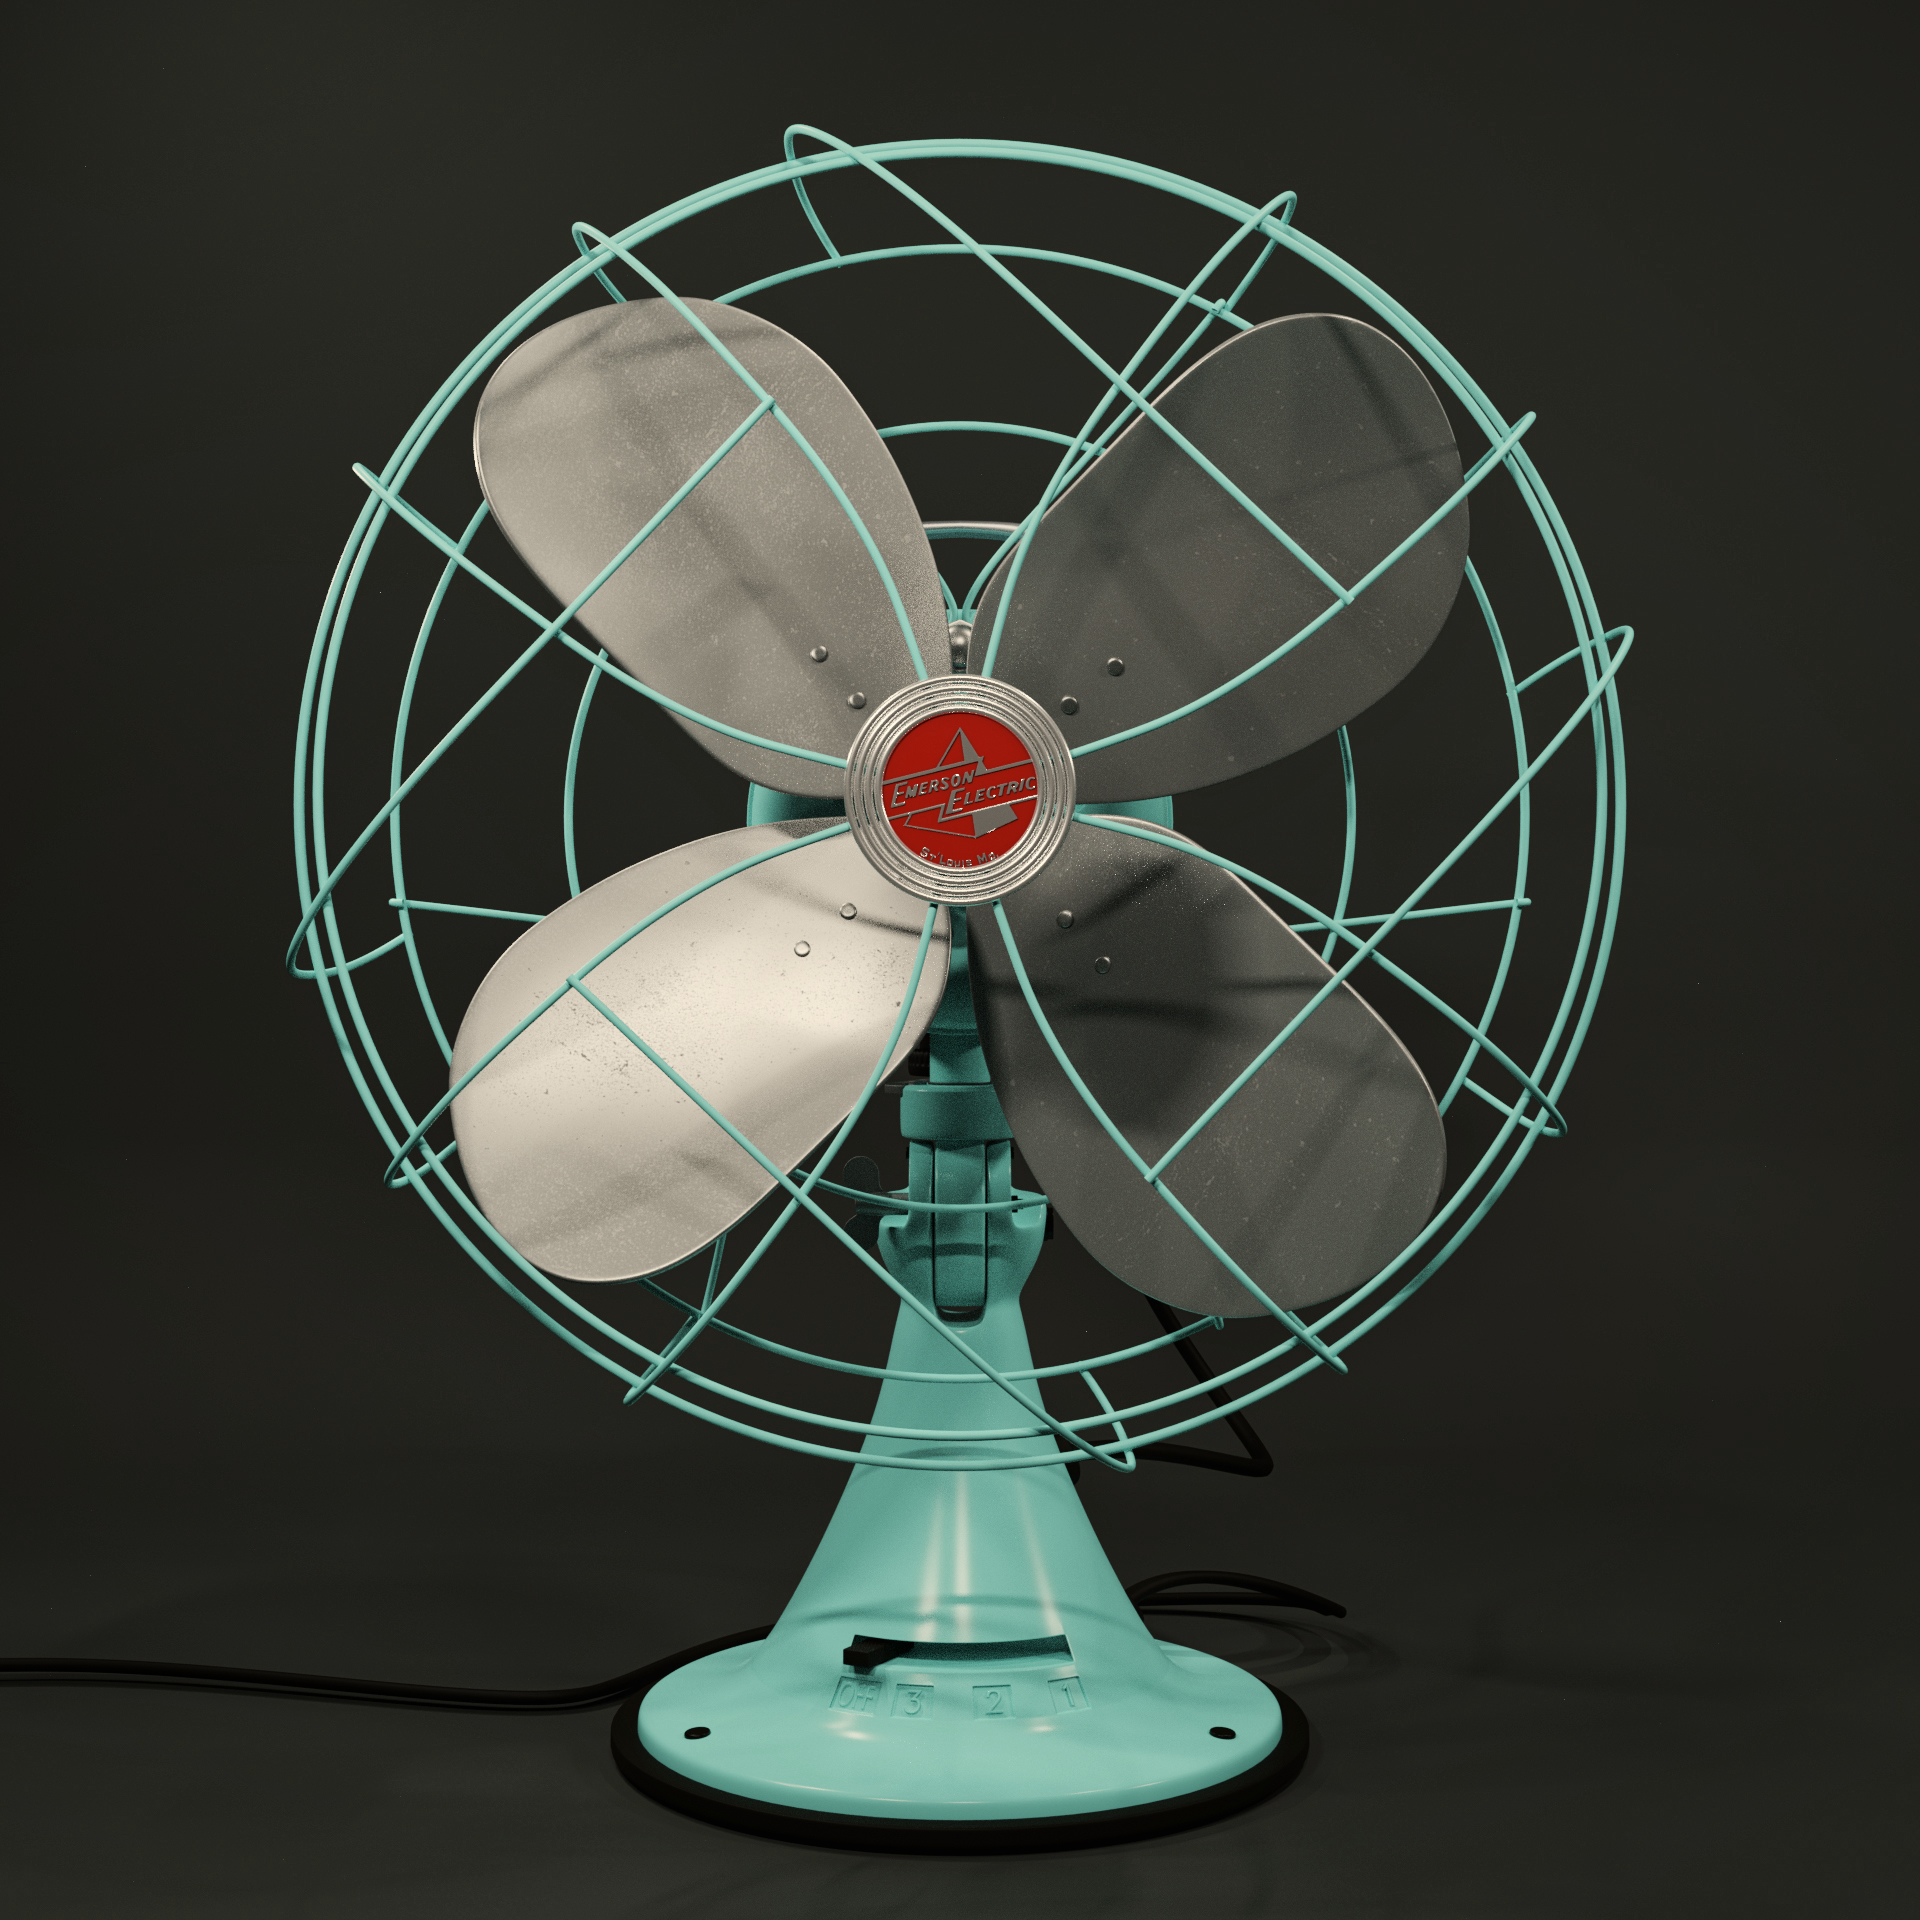 1950s Emerson Electric Fan - DONE - Finished Projects - Blender Artists  Community